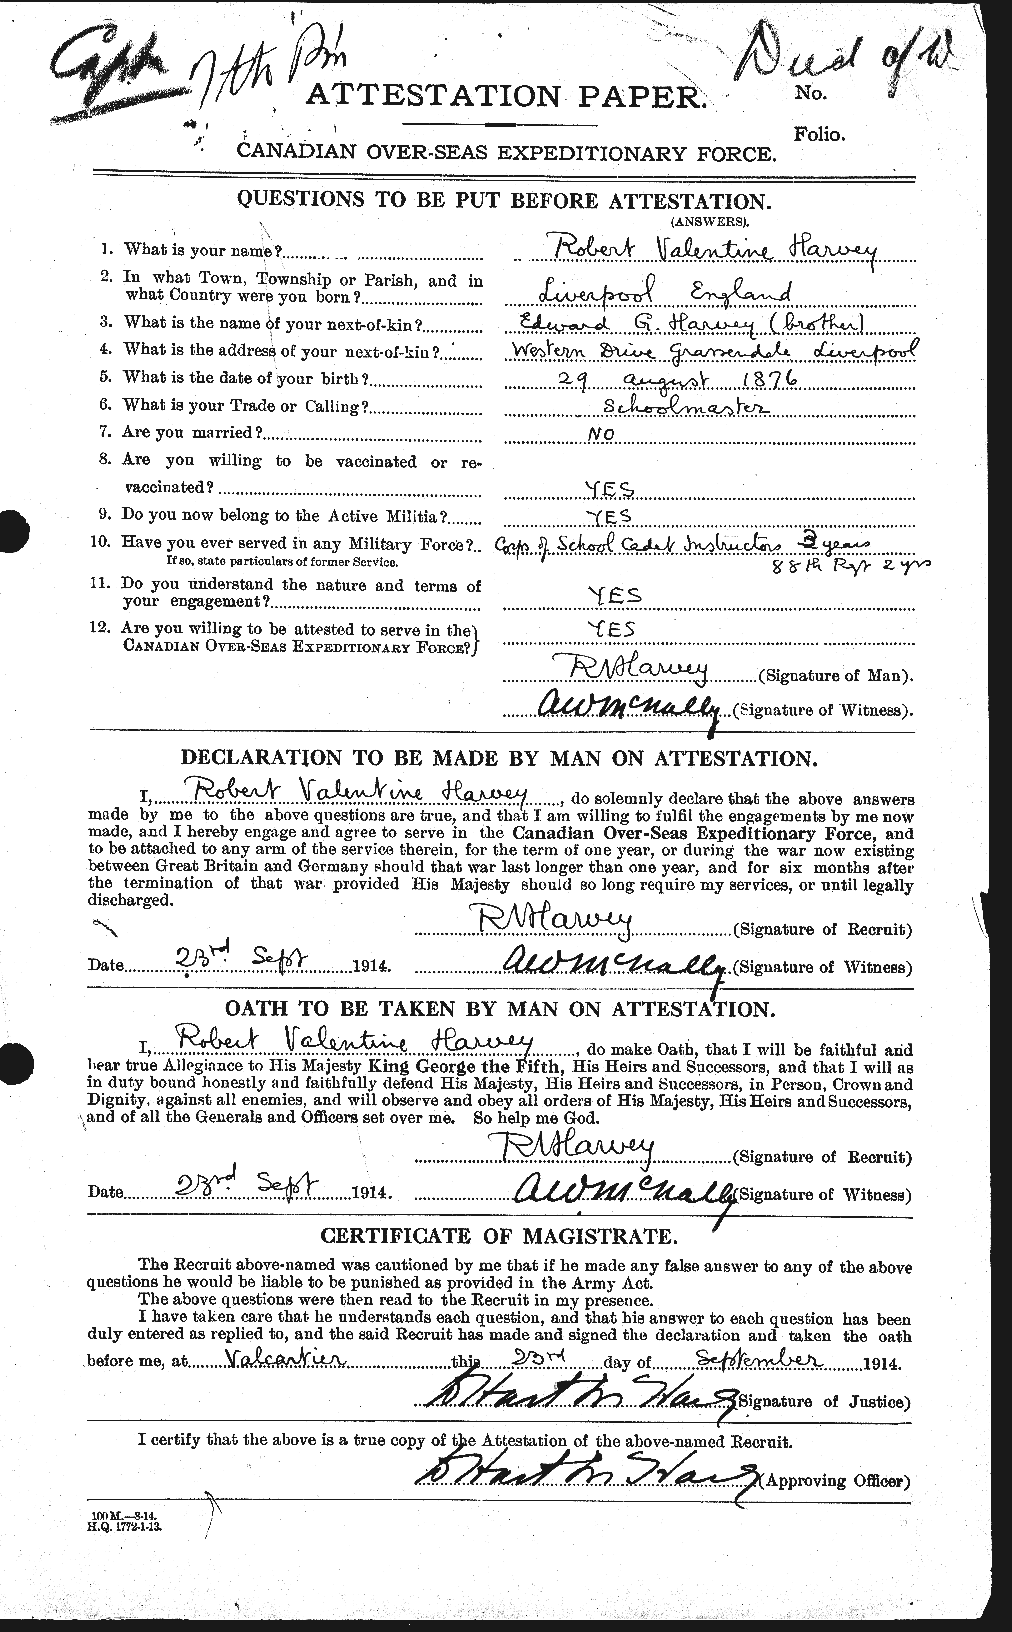 Personnel Records of the First World War - CEF 382146a